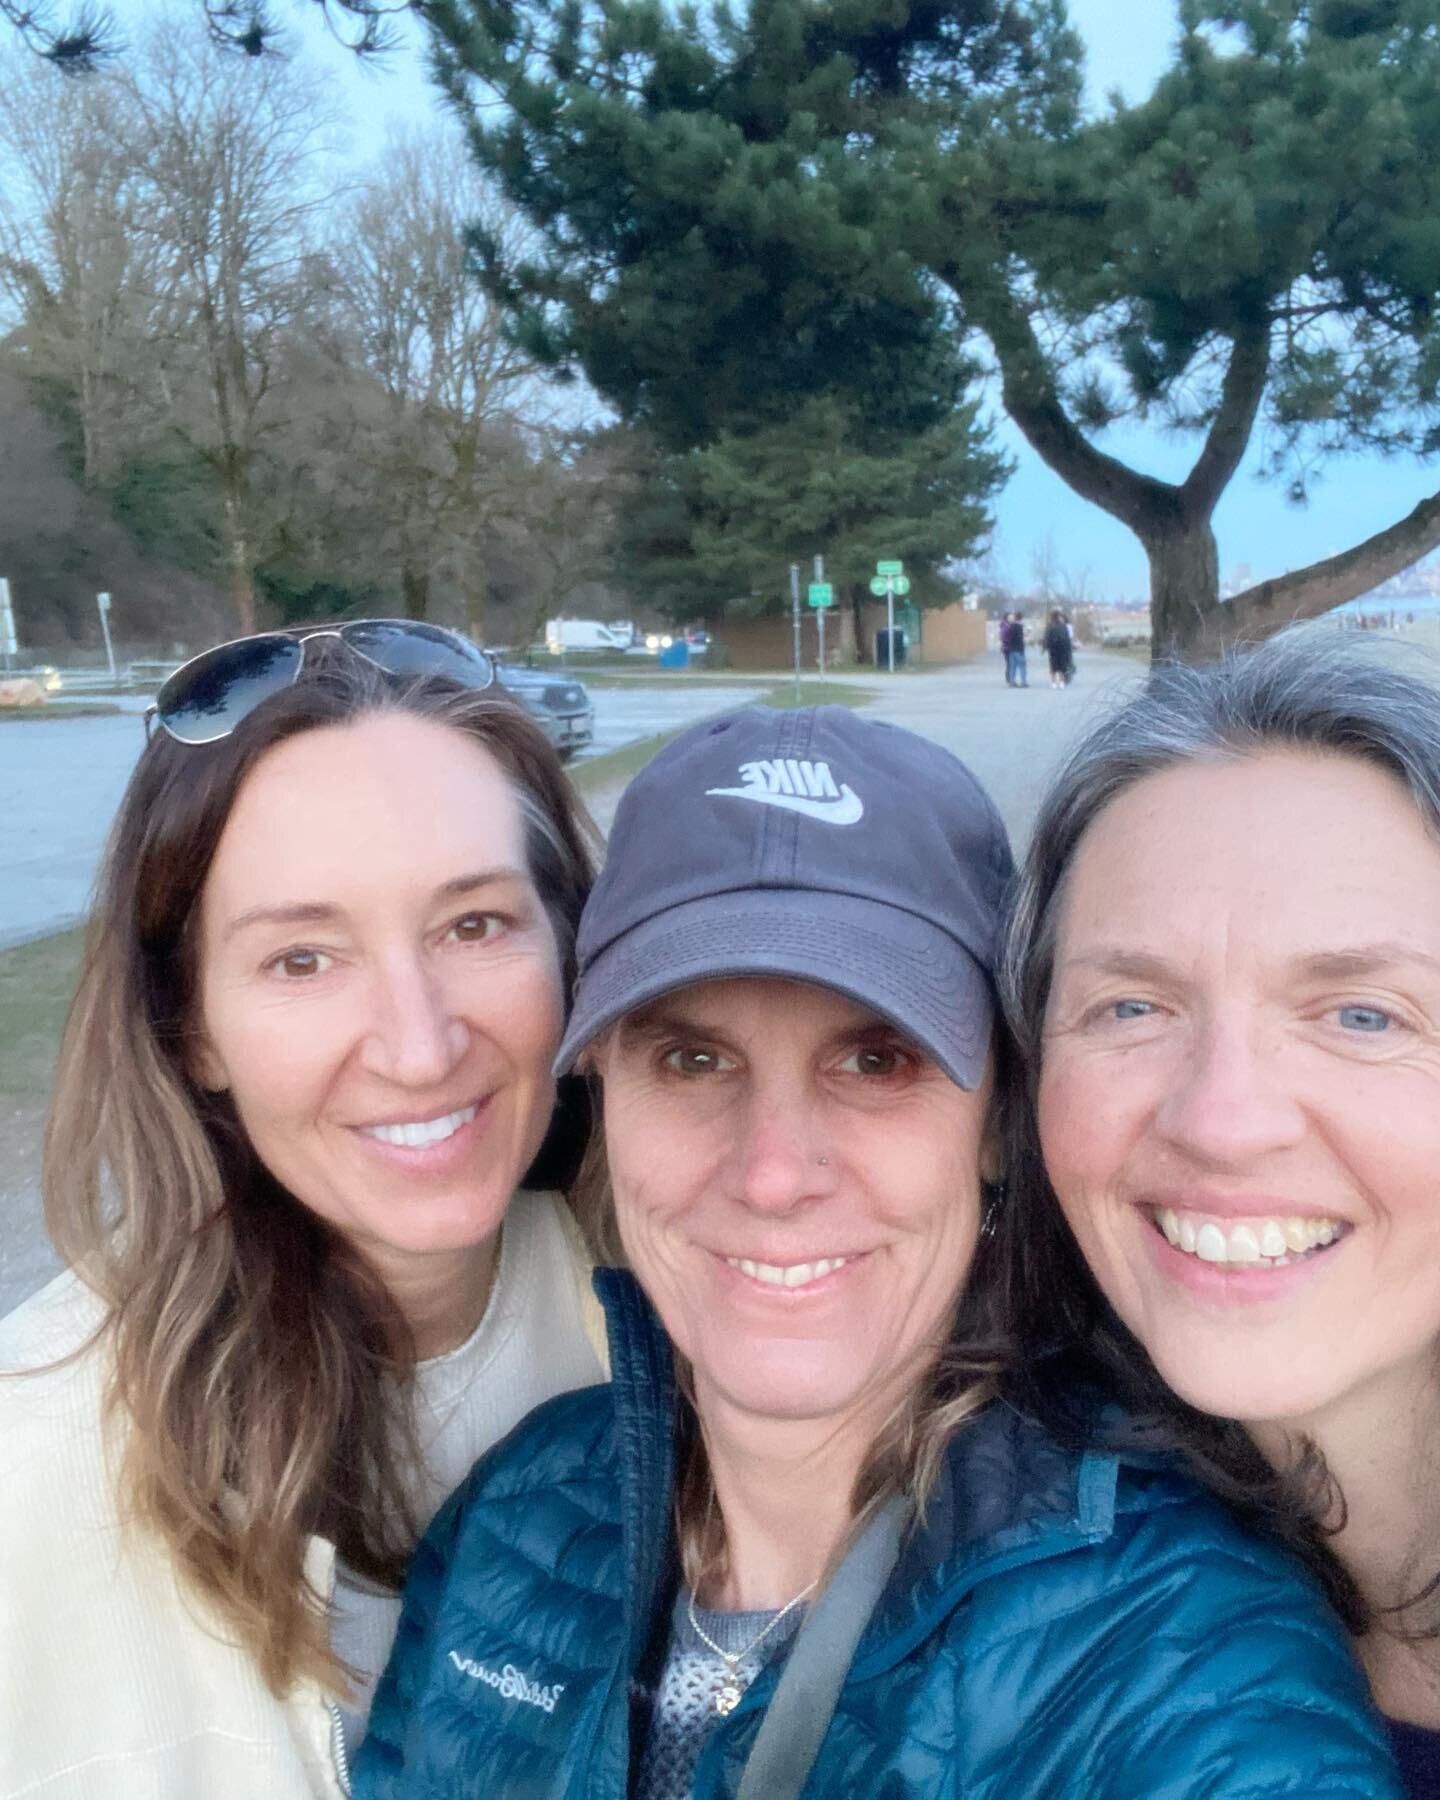 Savary Island Ultimate Vitality Retreat Planning Walk at Jericho Beach with my co-facilitators @ot_shelley  and @sarah__cormack ❤️! Lots. Of. Laughter. And love. Always. With these two.

September 11-&ndash;15th -registration opens SOON! 💃🙌

I&rsqu